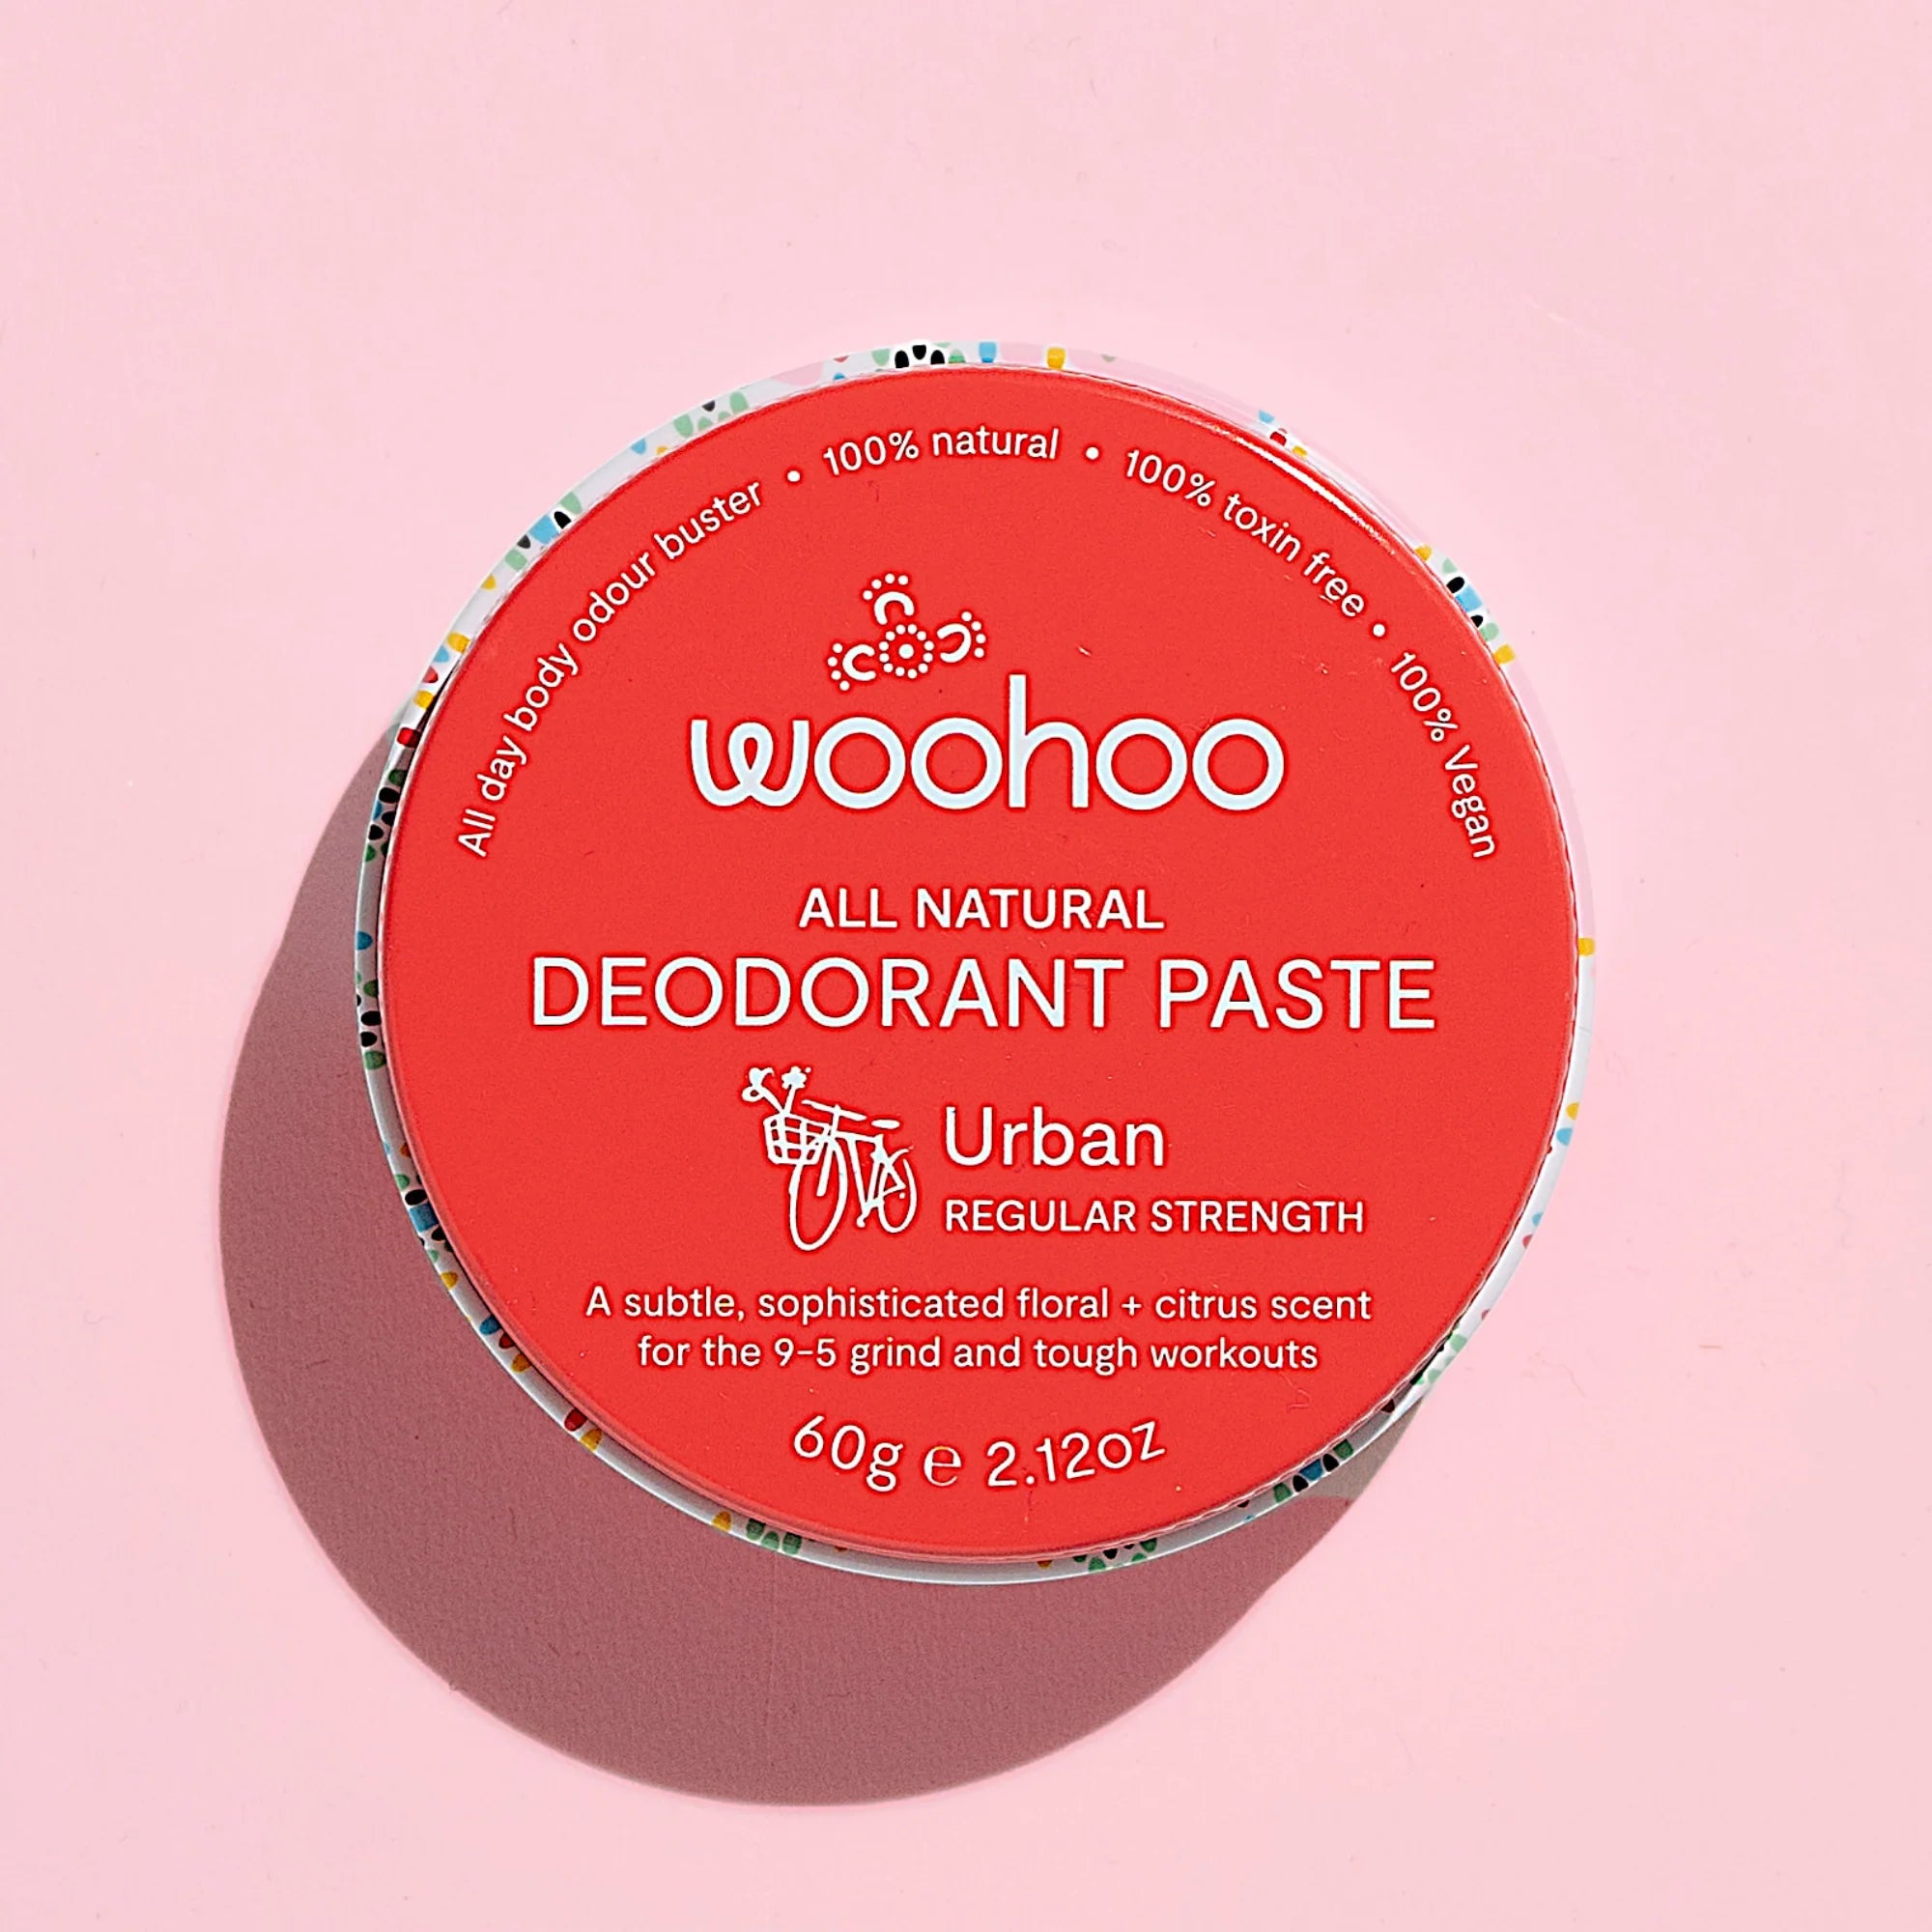 Image of the Woohoo Urban Natural Deodorant Paste tin on a pink background